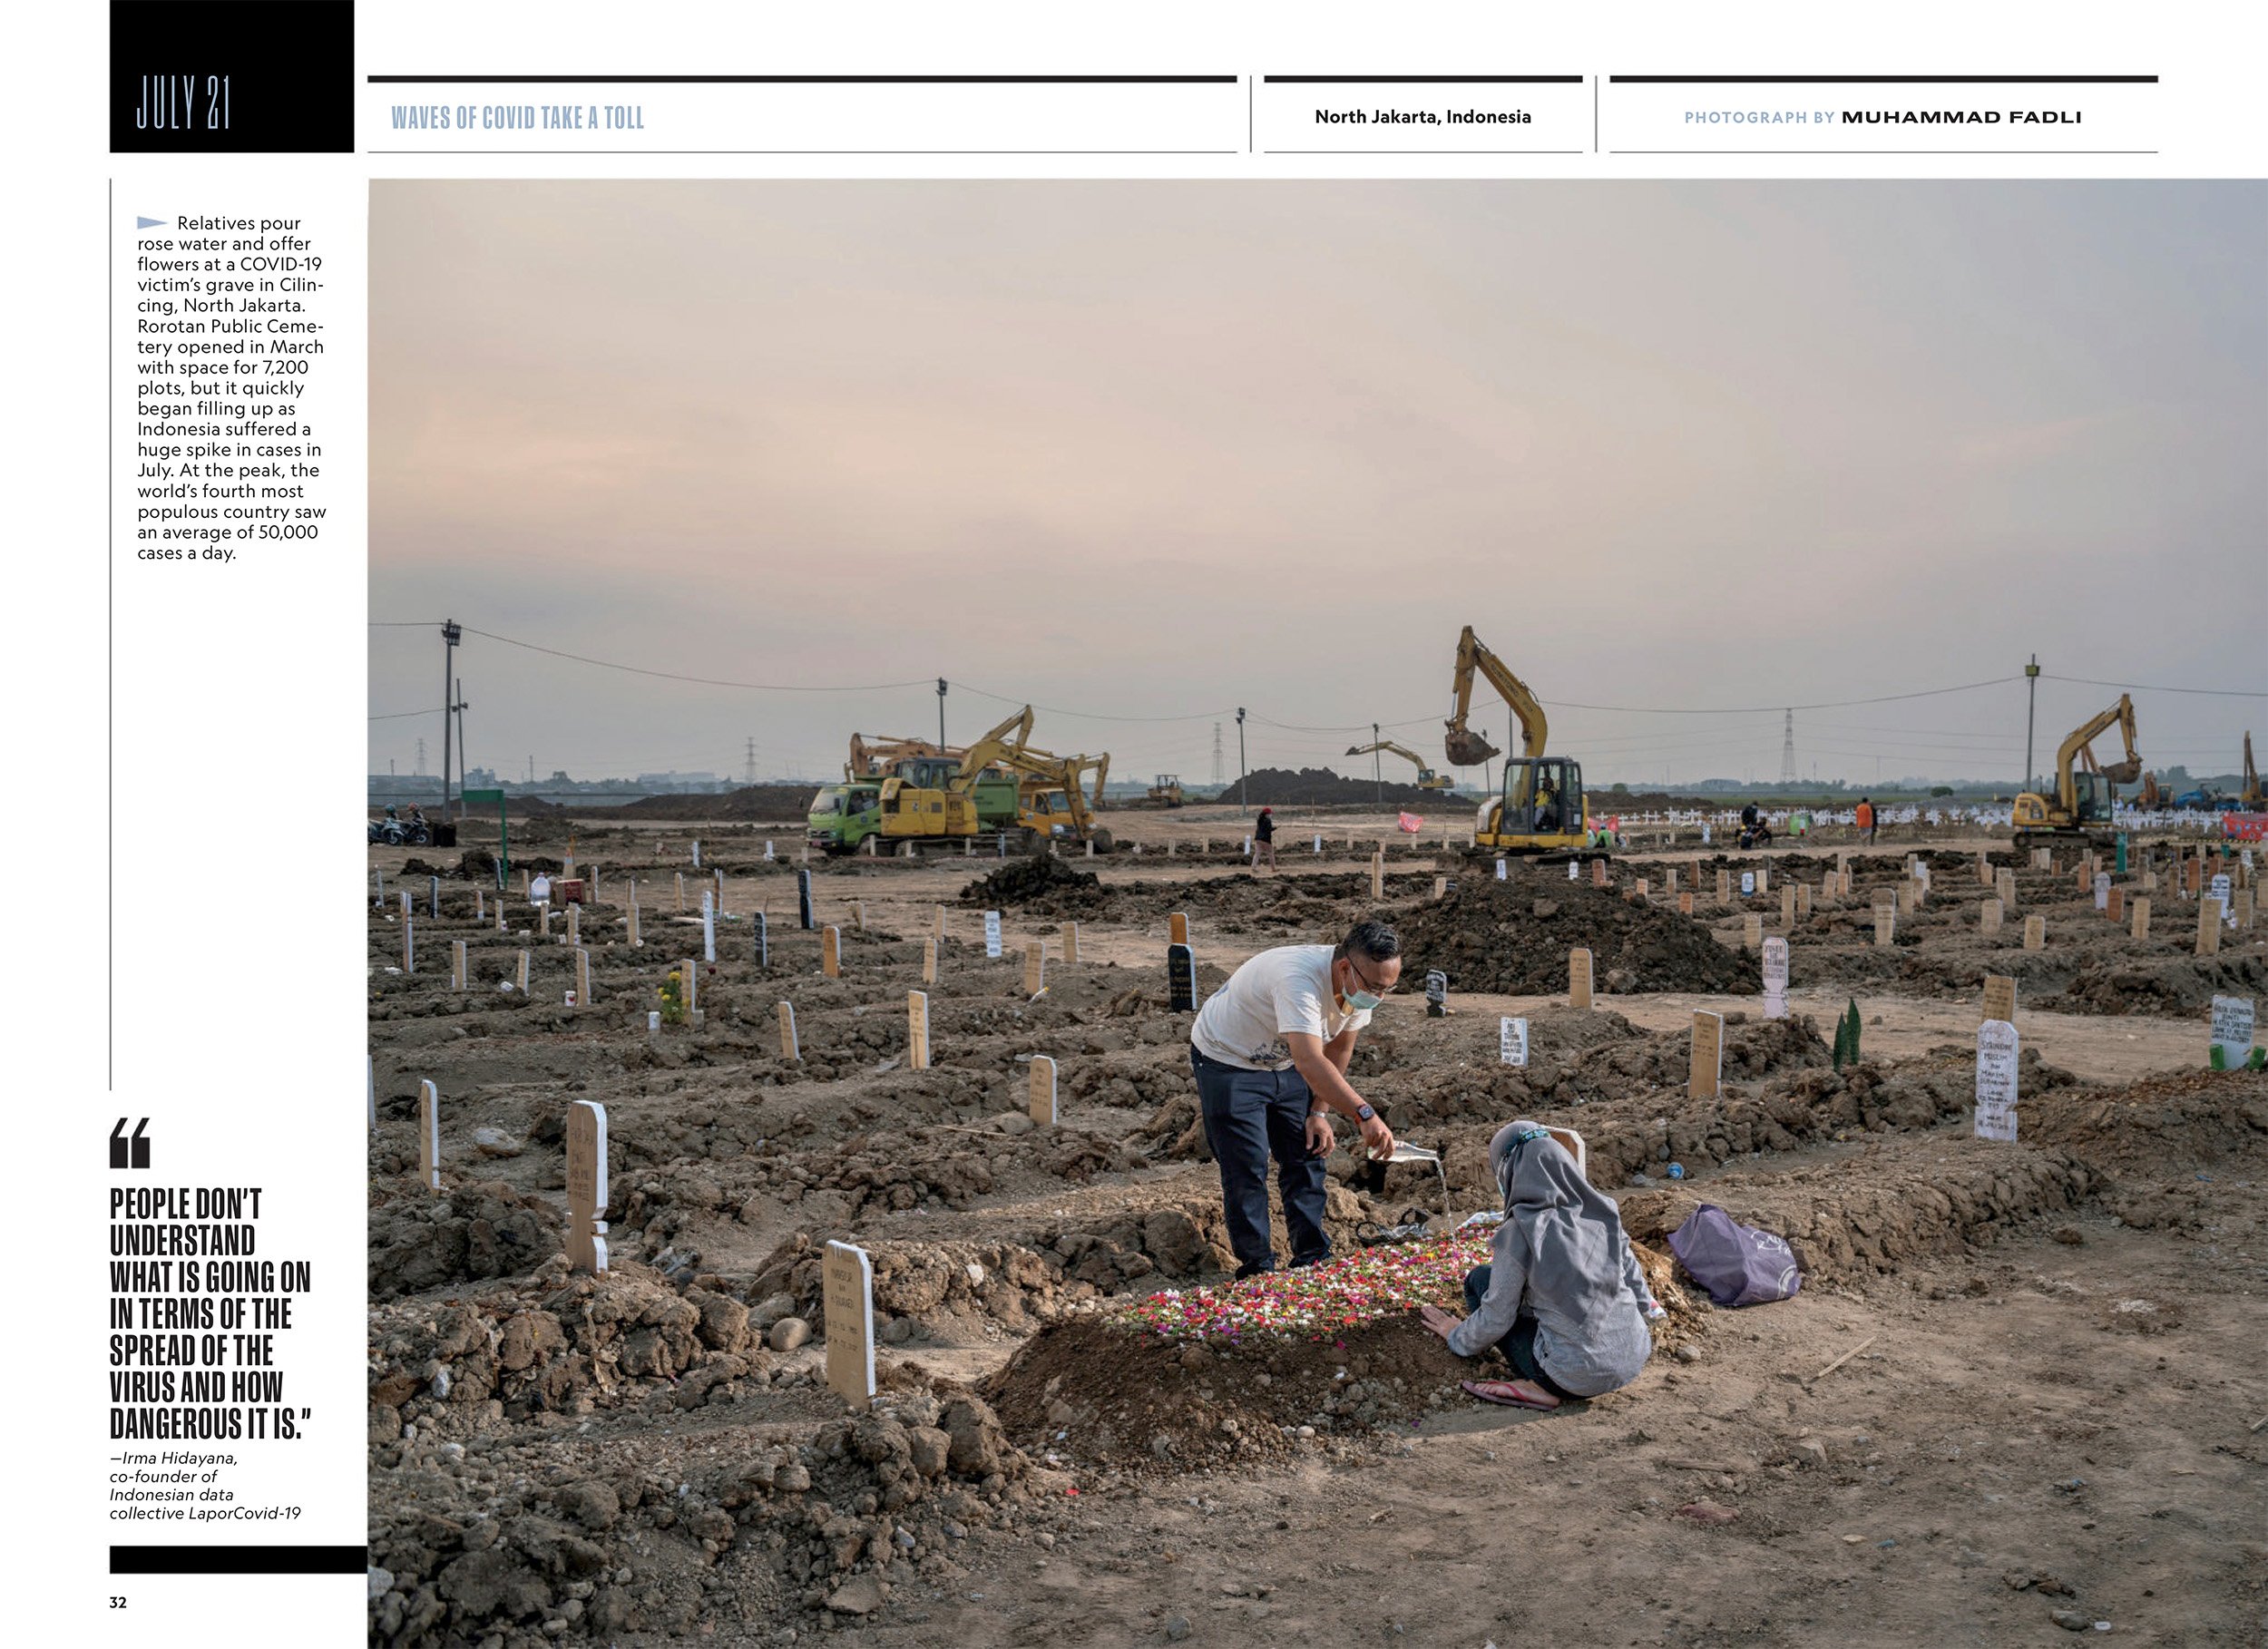  Covid-19 cemetery in Jakarta, National Geographic Magazine Year in Picture issue, January 2022 